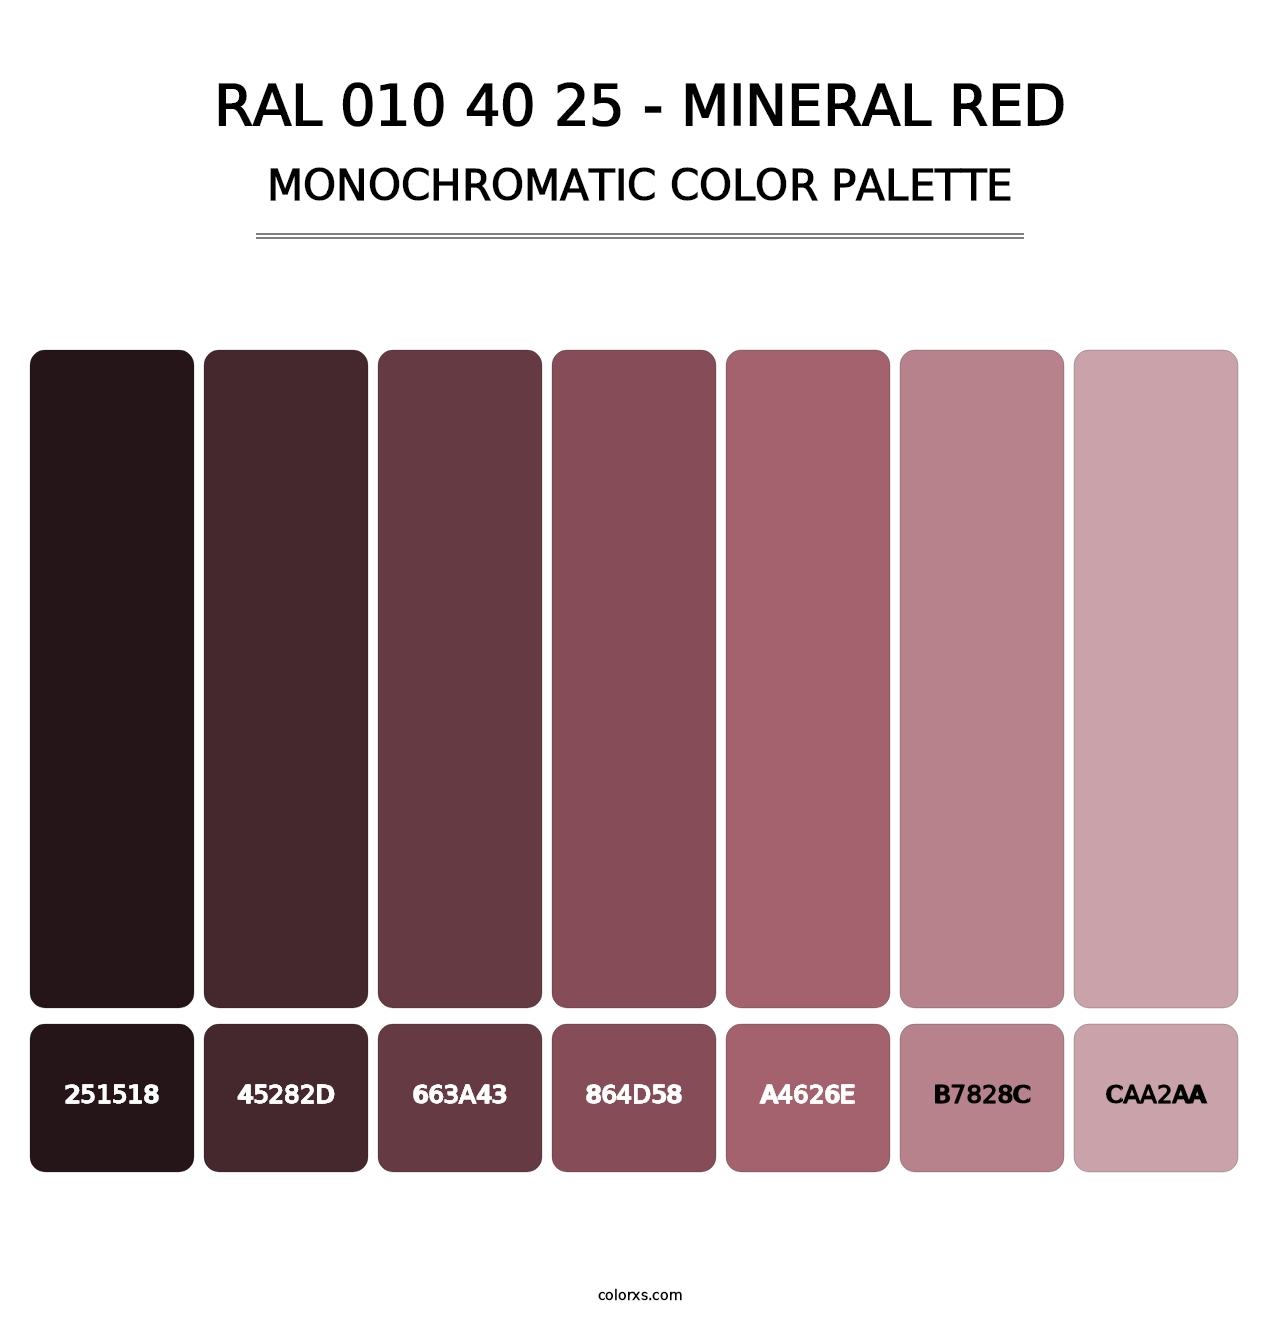 RAL 010 40 25 - Mineral Red - Monochromatic Color Palette